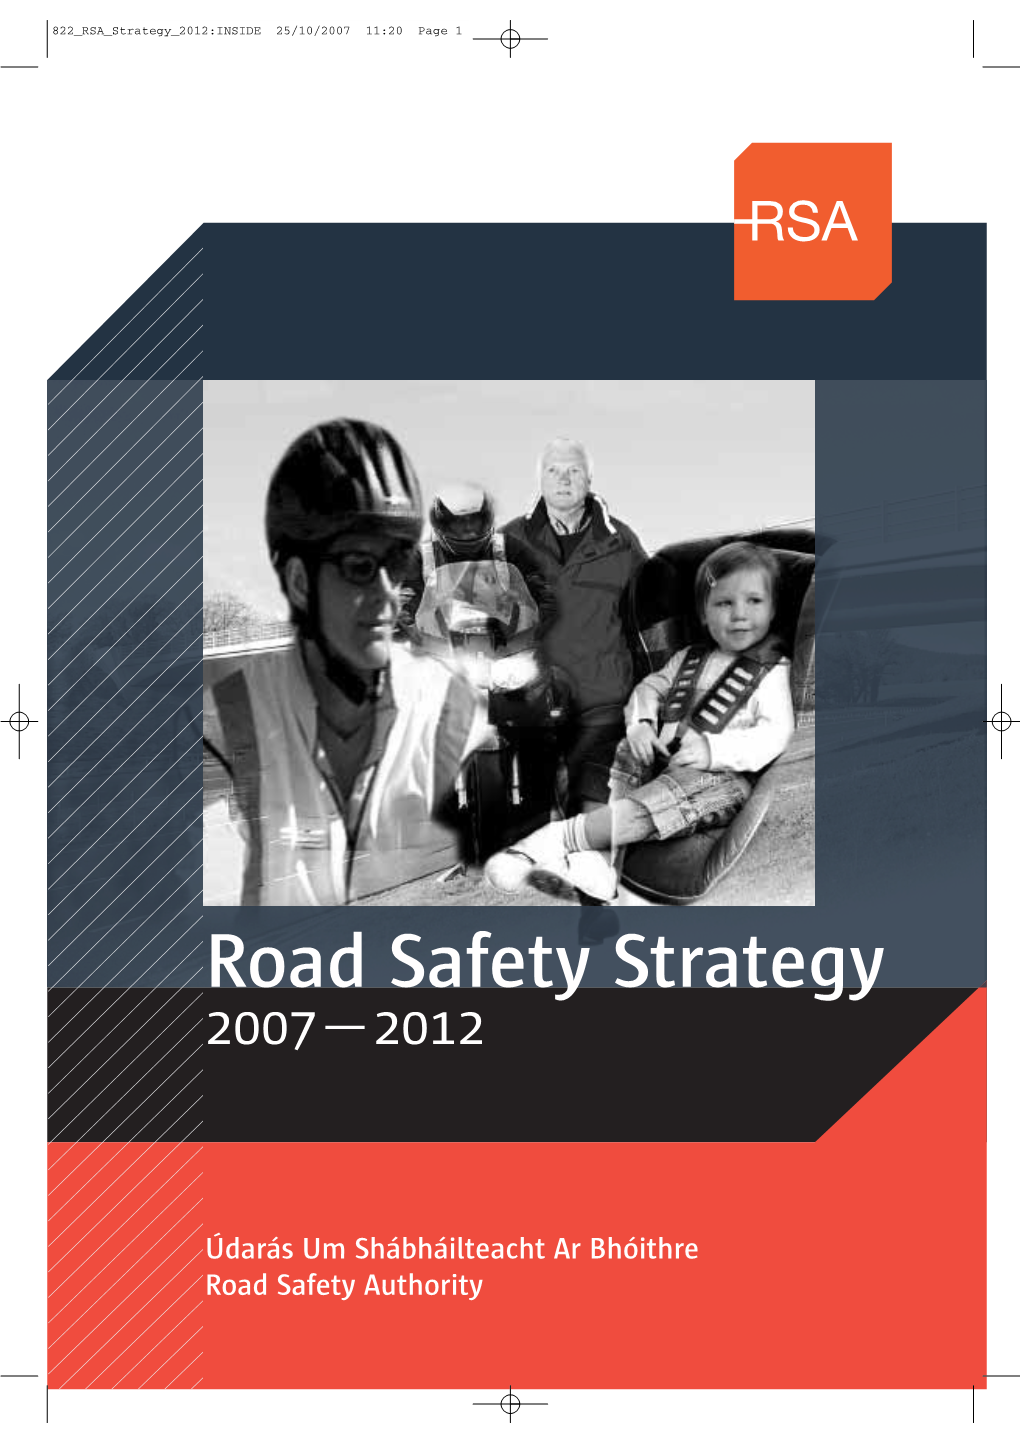 Road Safety Strategy 2007-2012 23